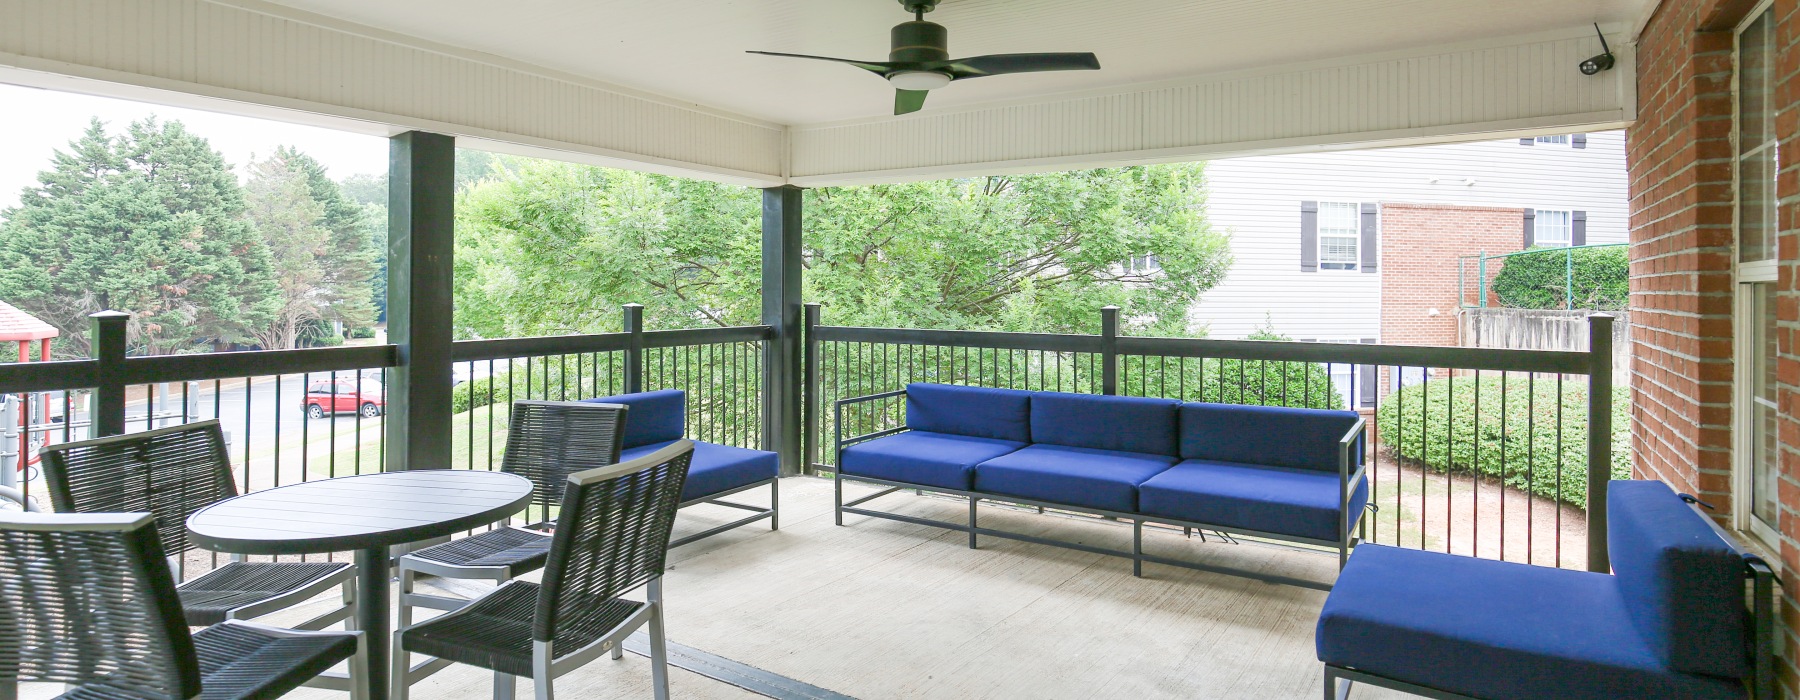 Large porch with furniture and ceiling fan